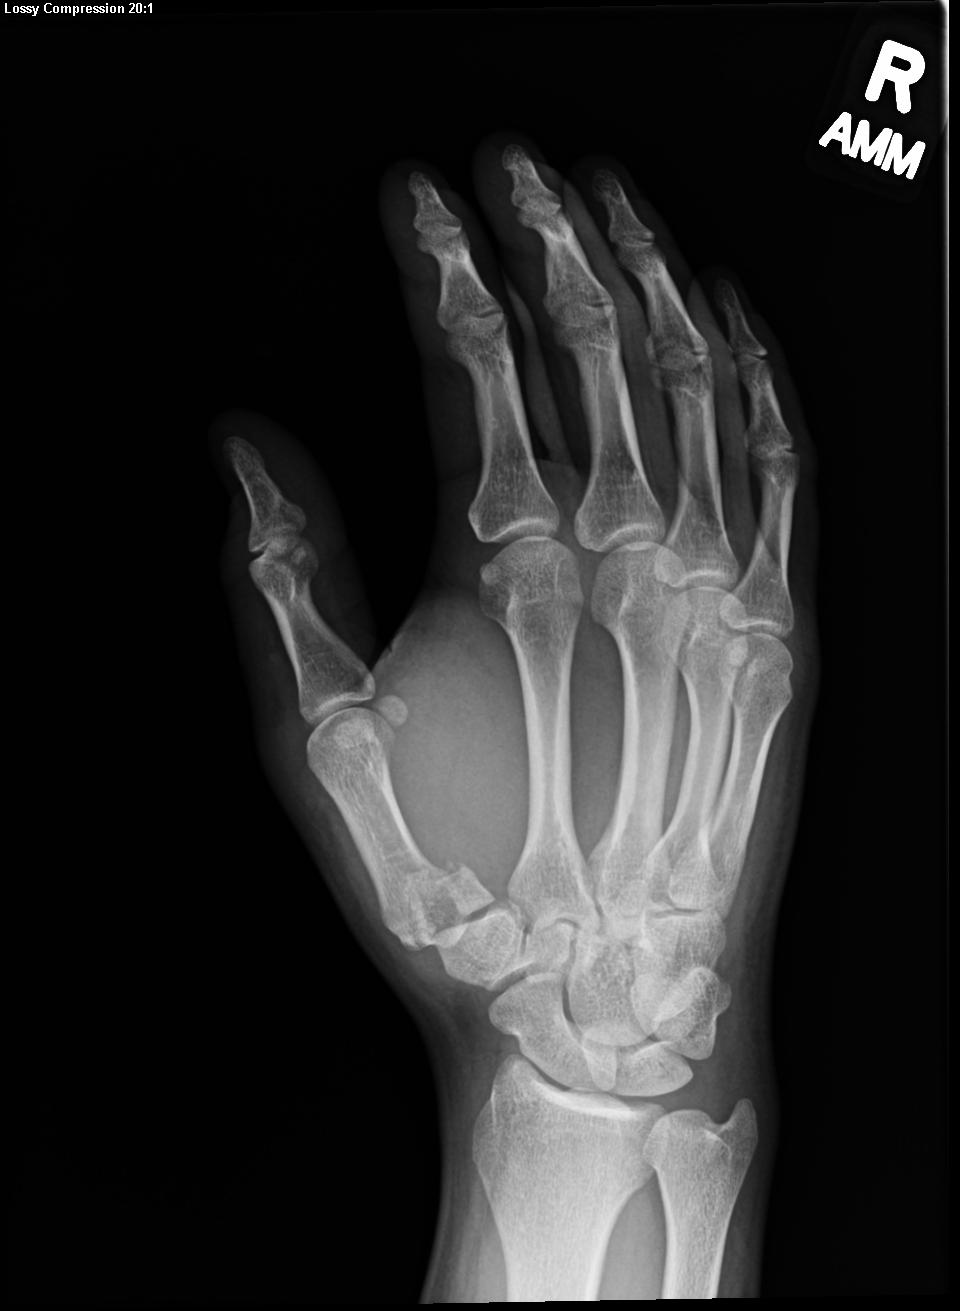 Oblique x-ray view of the hand with a Bennett fracture